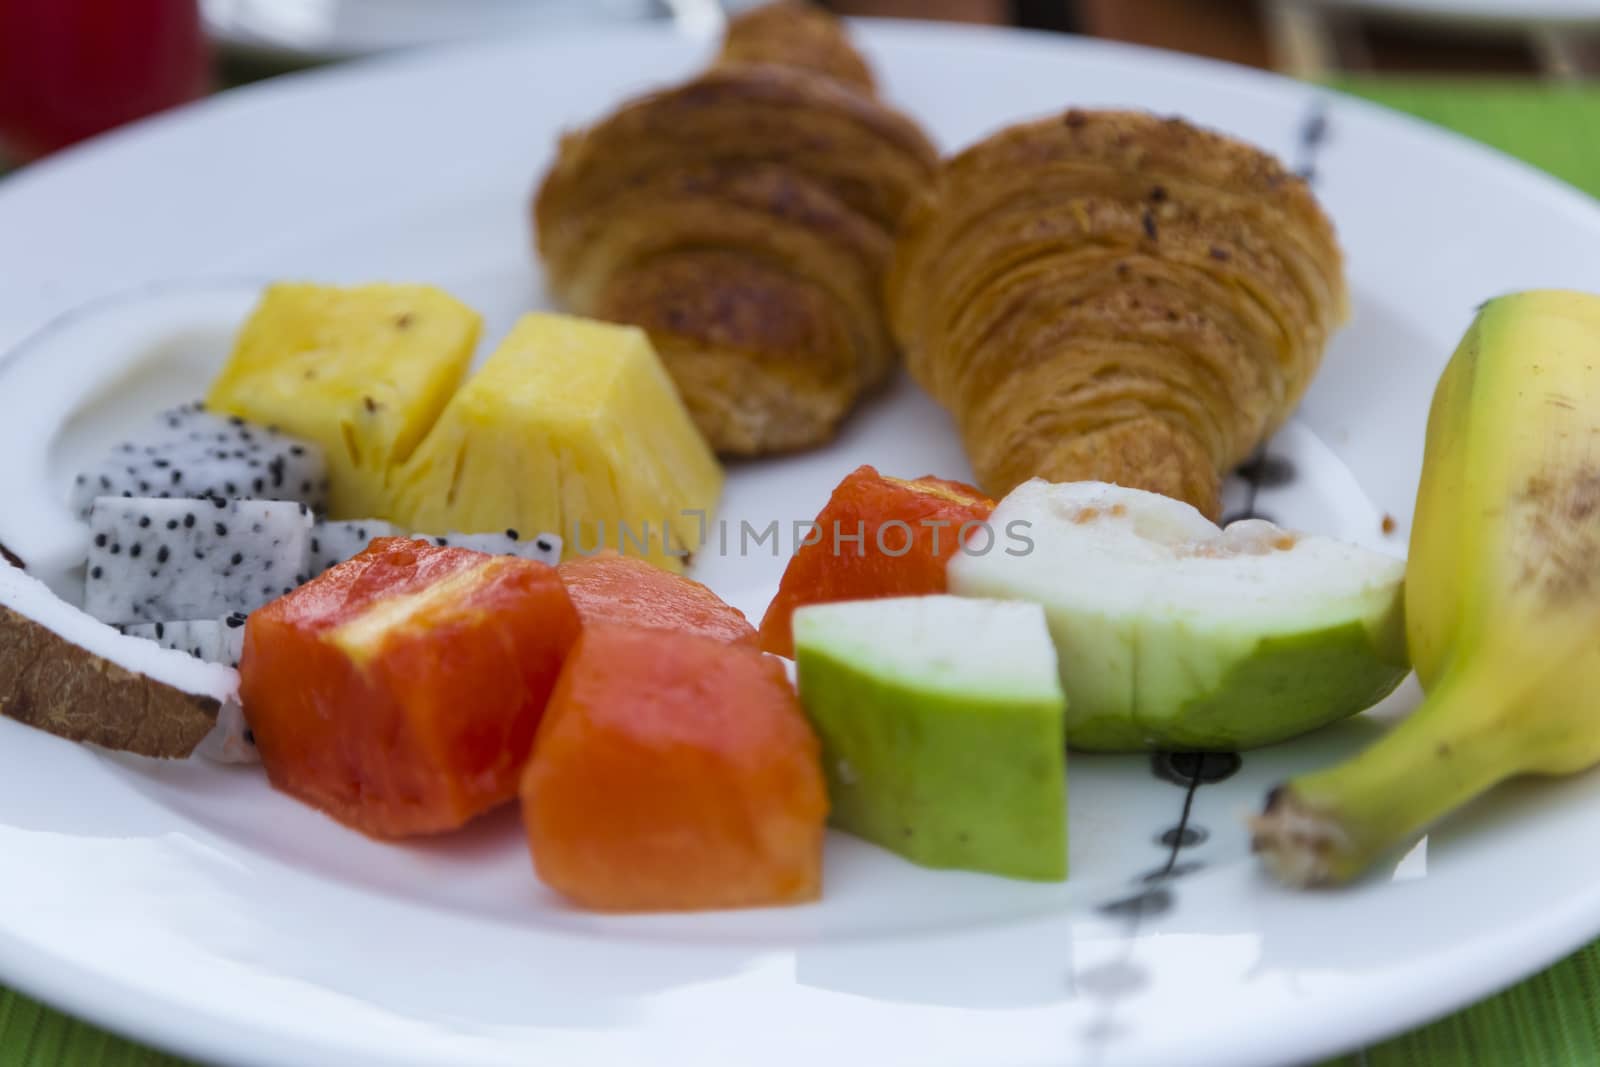 Delicious healthy breaklfast outdoors in a wooden table with sea at background. The breakfast consists of fresh fruit and waffles with pancakes.